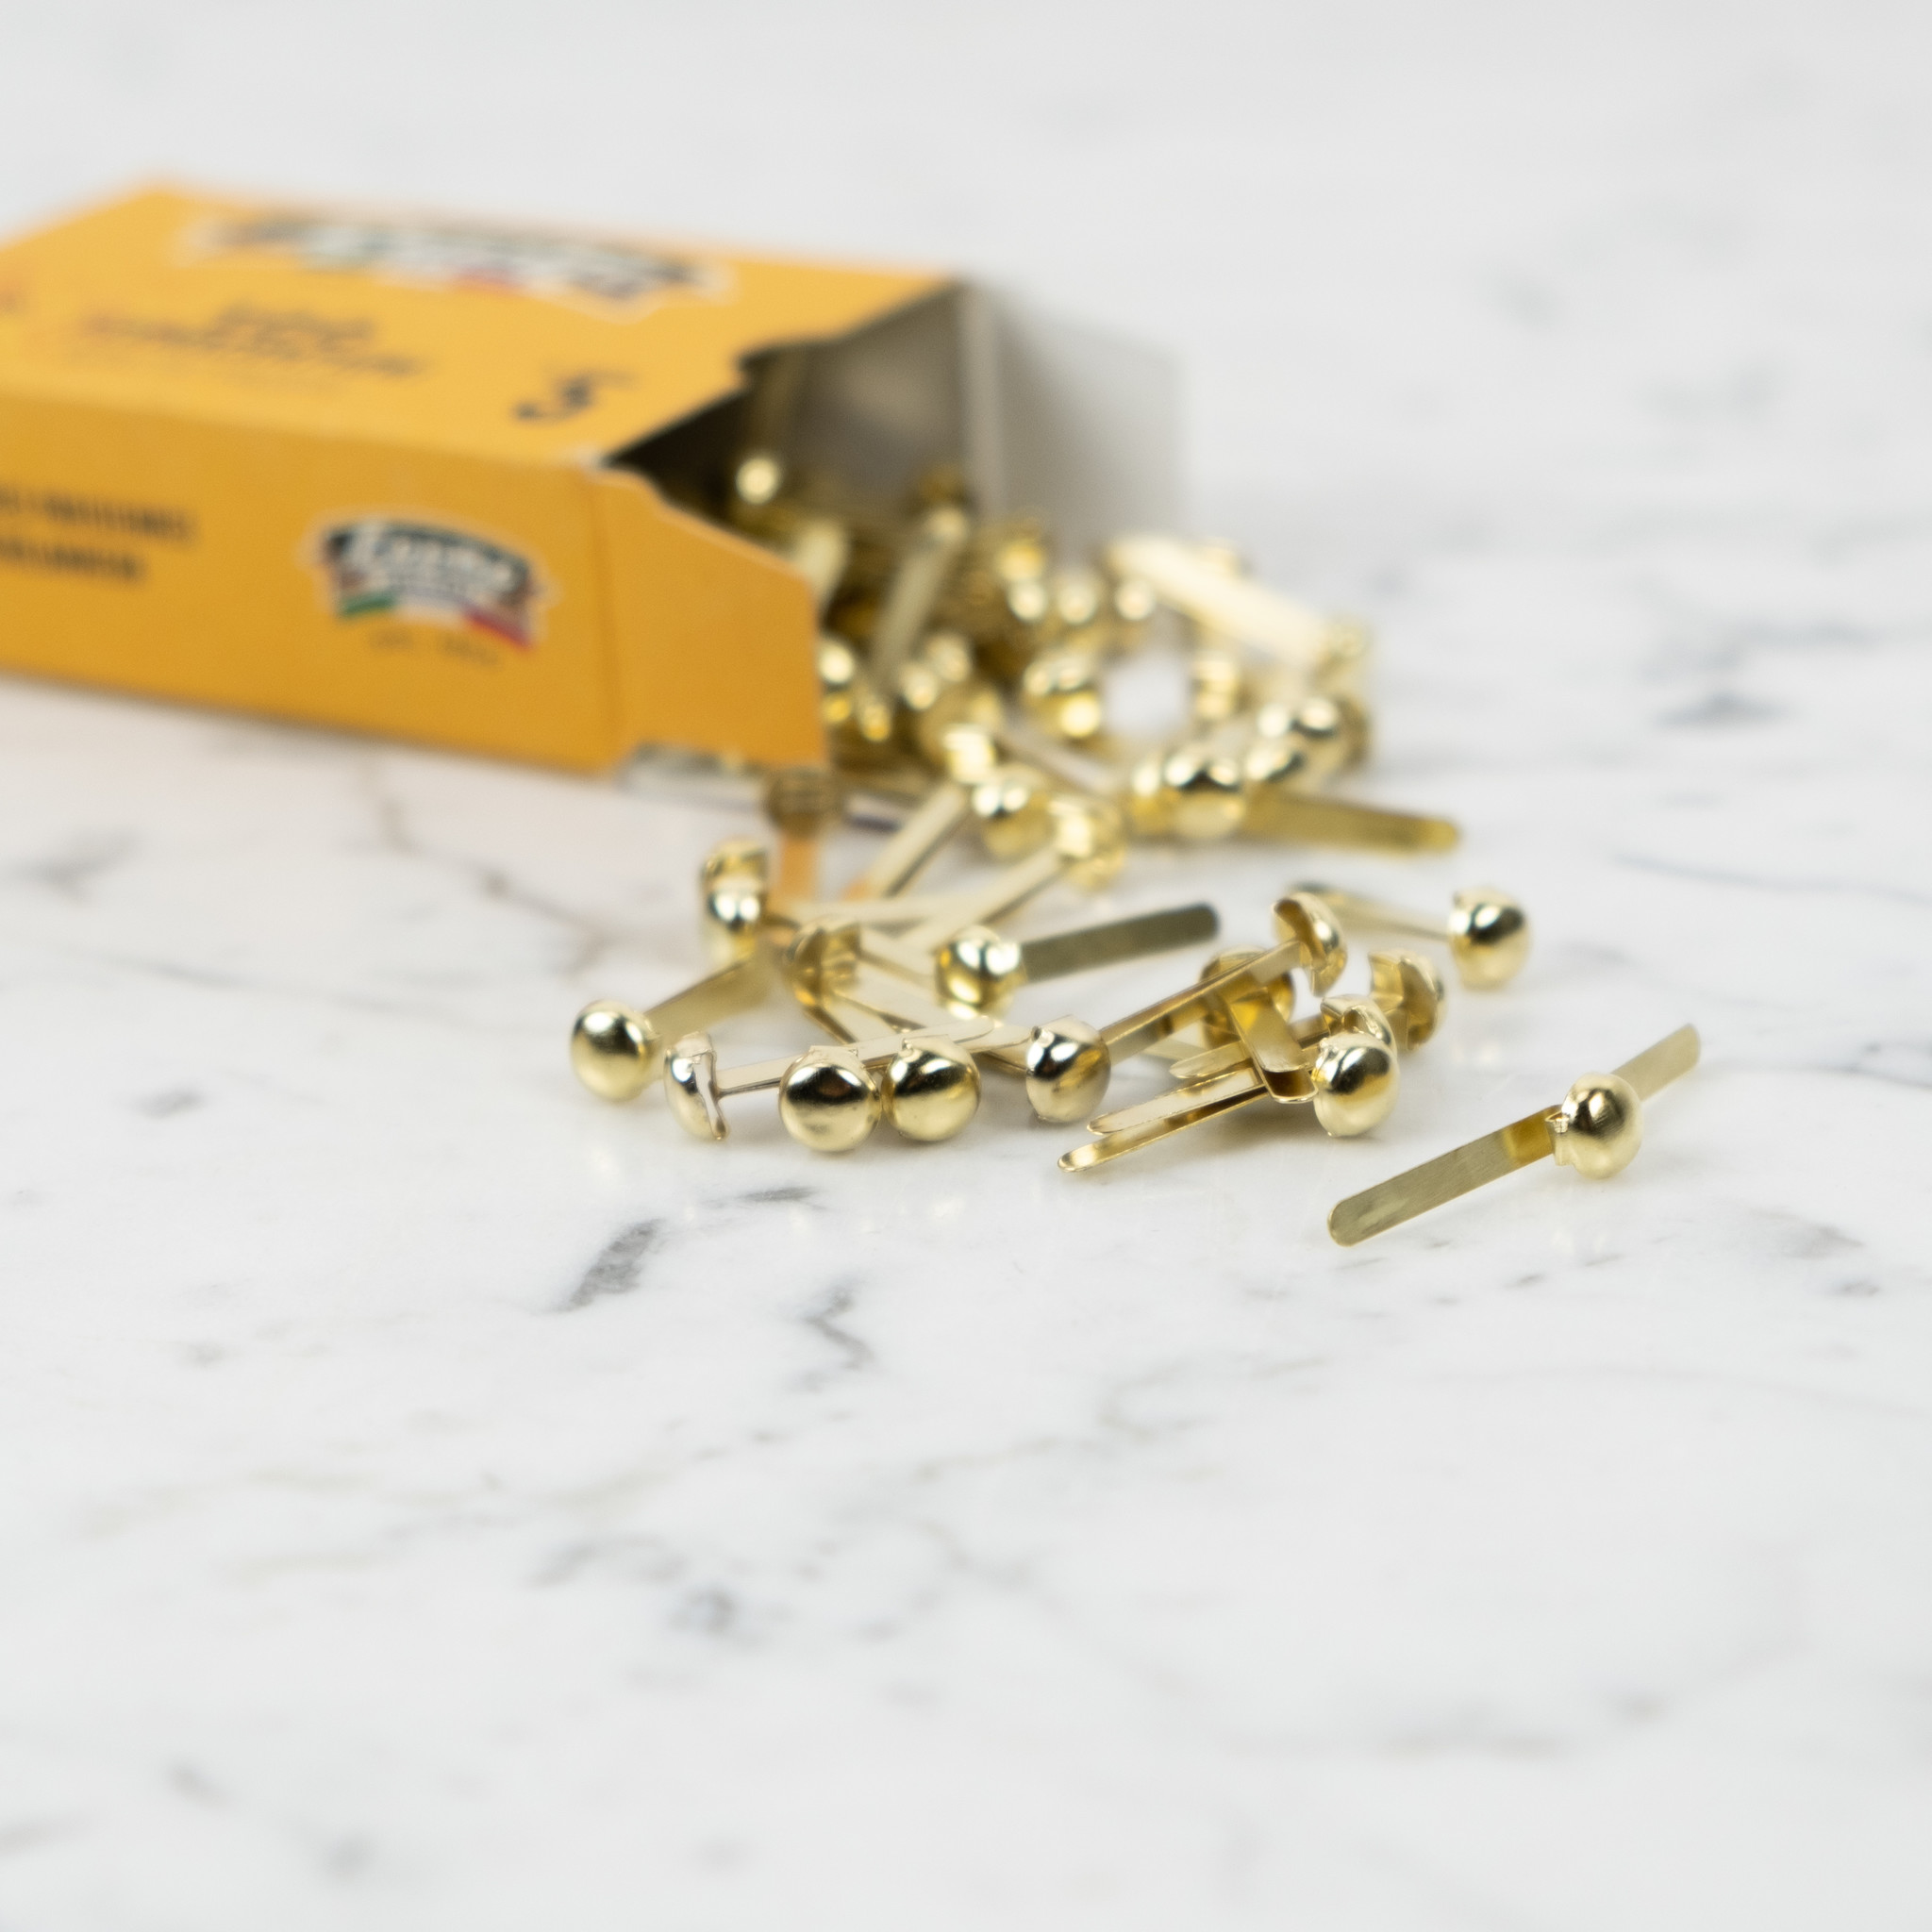 1 Brass Plated Paper Fasteners - 100 Pieces